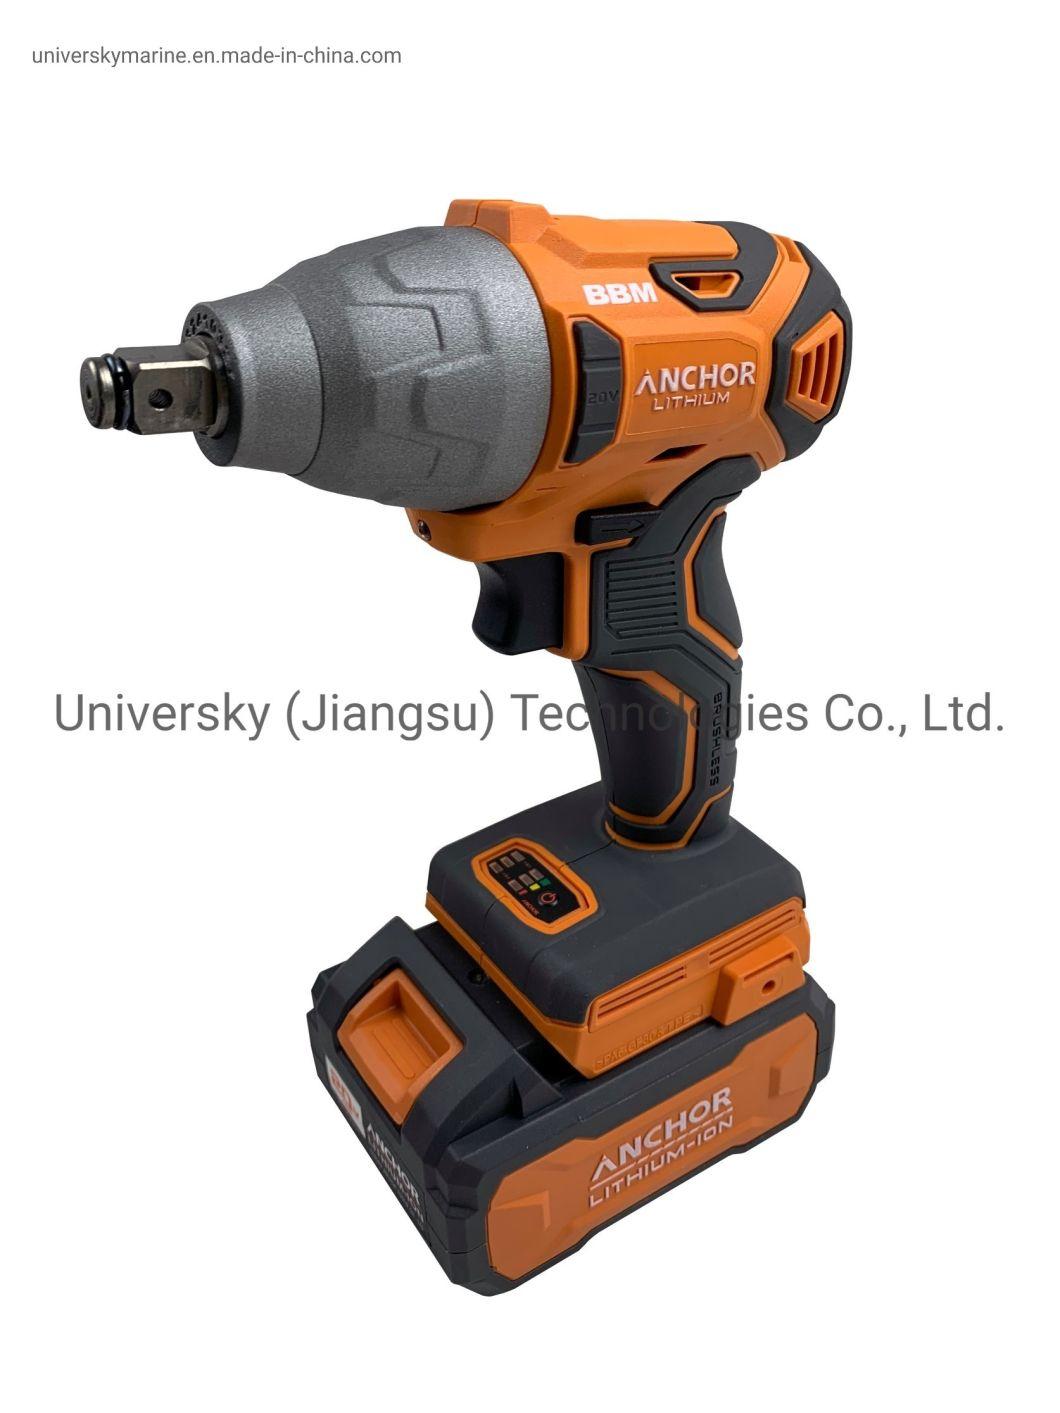 NEW ARRIVAL 20V Li-ion BATTERY CORDLESS  IMPACT DREIVER WITHOUT CARBON BRUSH MOTOR IODINE PLUG-IN